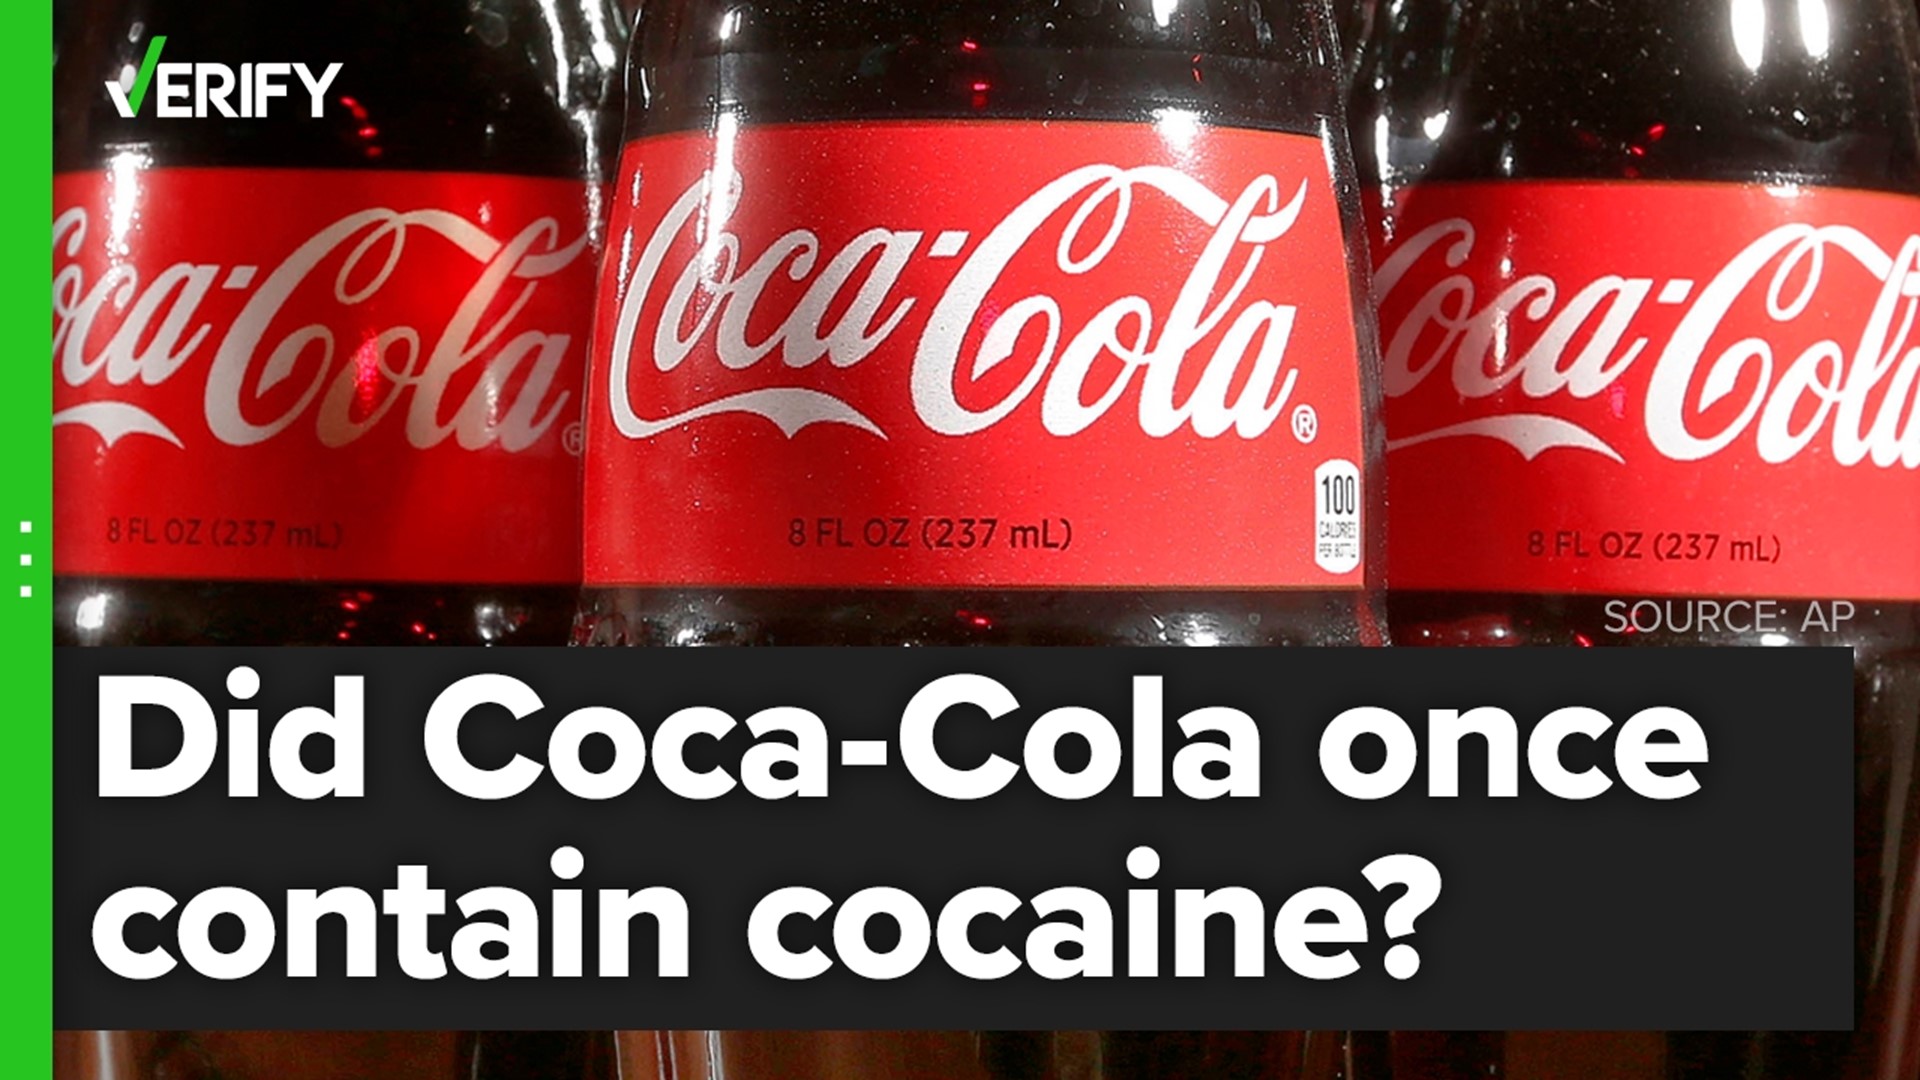 Coca-Cola contained small amounts of cocaine when it was invented, but not in its white powdered form that we know today, experts say.